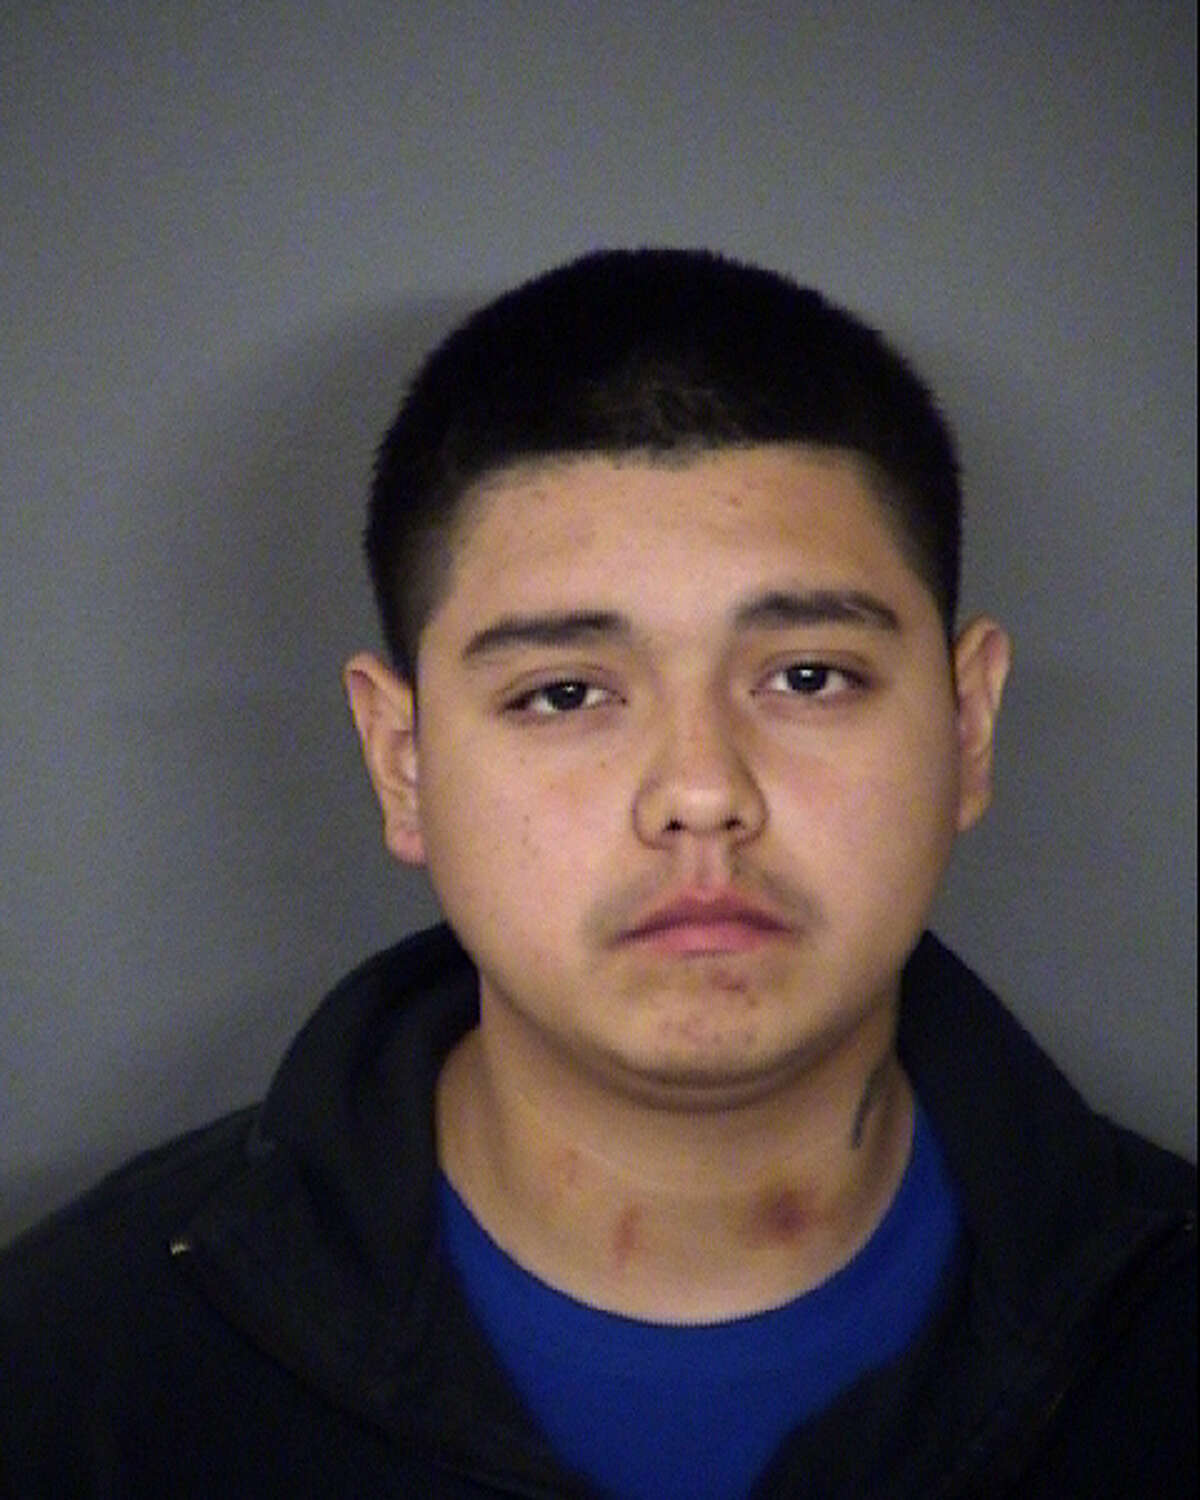 Marc Gutierrez was charged with intentionally causing severe bodily harm to a child.